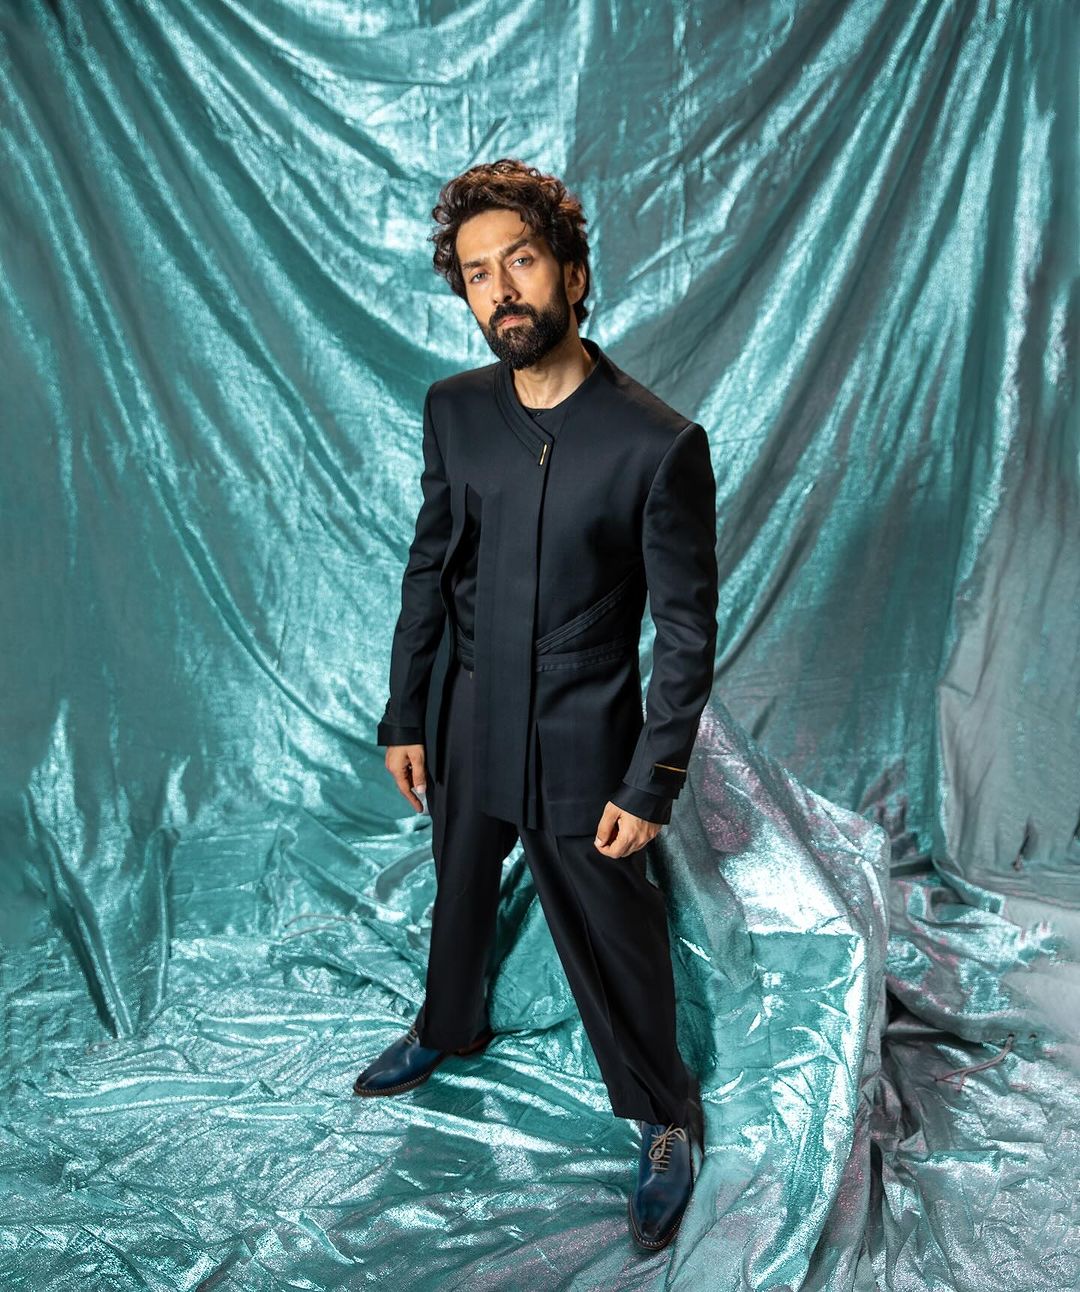 Our Most Handsome Actor Nakuul Mehta Is All Set To Back With A Bang In Karan Johar's Web Show! Who Will Play Opposite To Him?